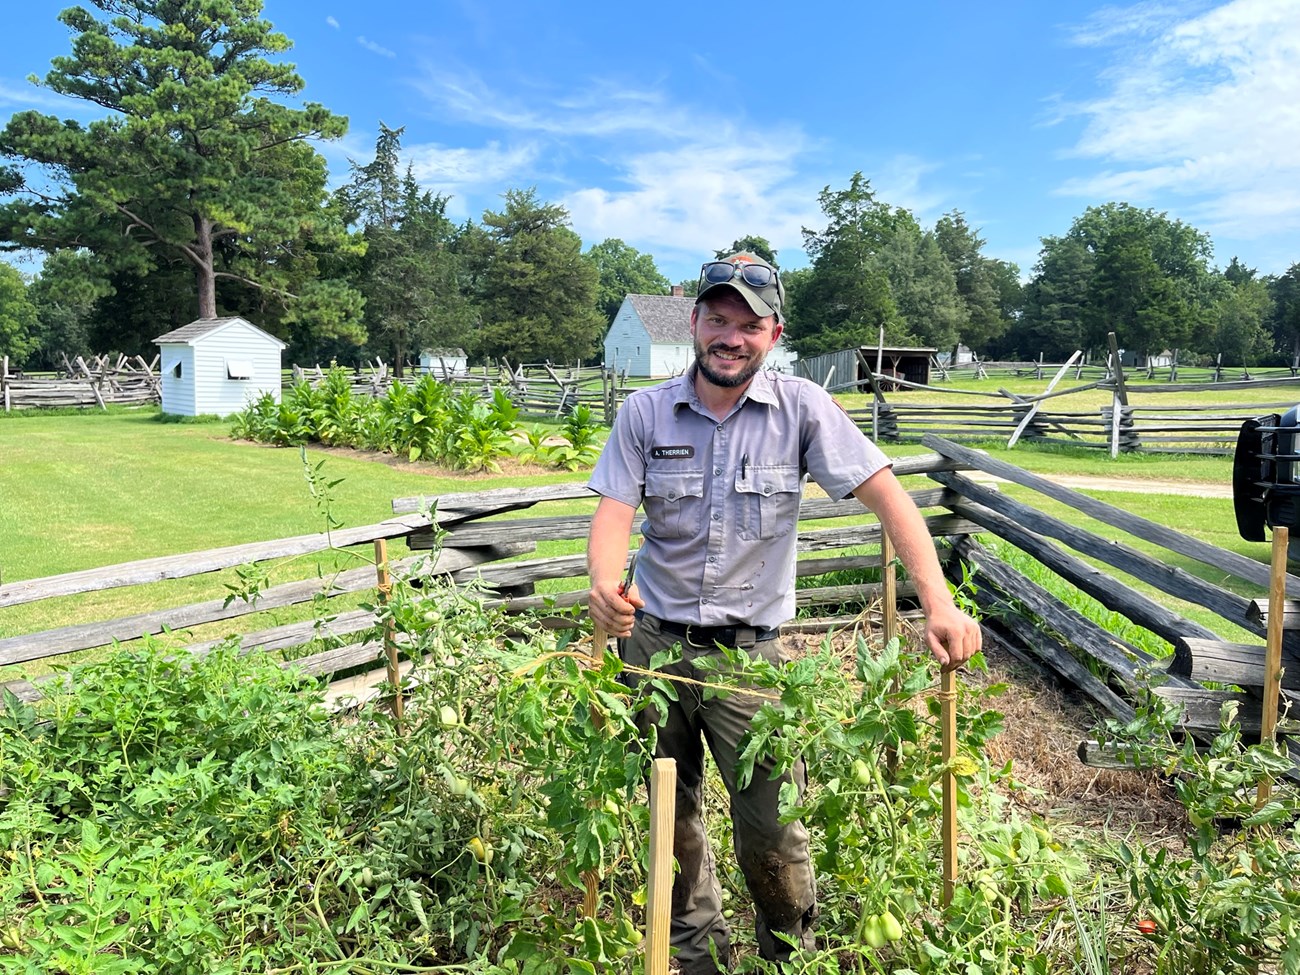 A Park Ranger works on the tomato plants in the vegetable patch of the colonial revival farm with rail fencing and white farm buildings in the background.